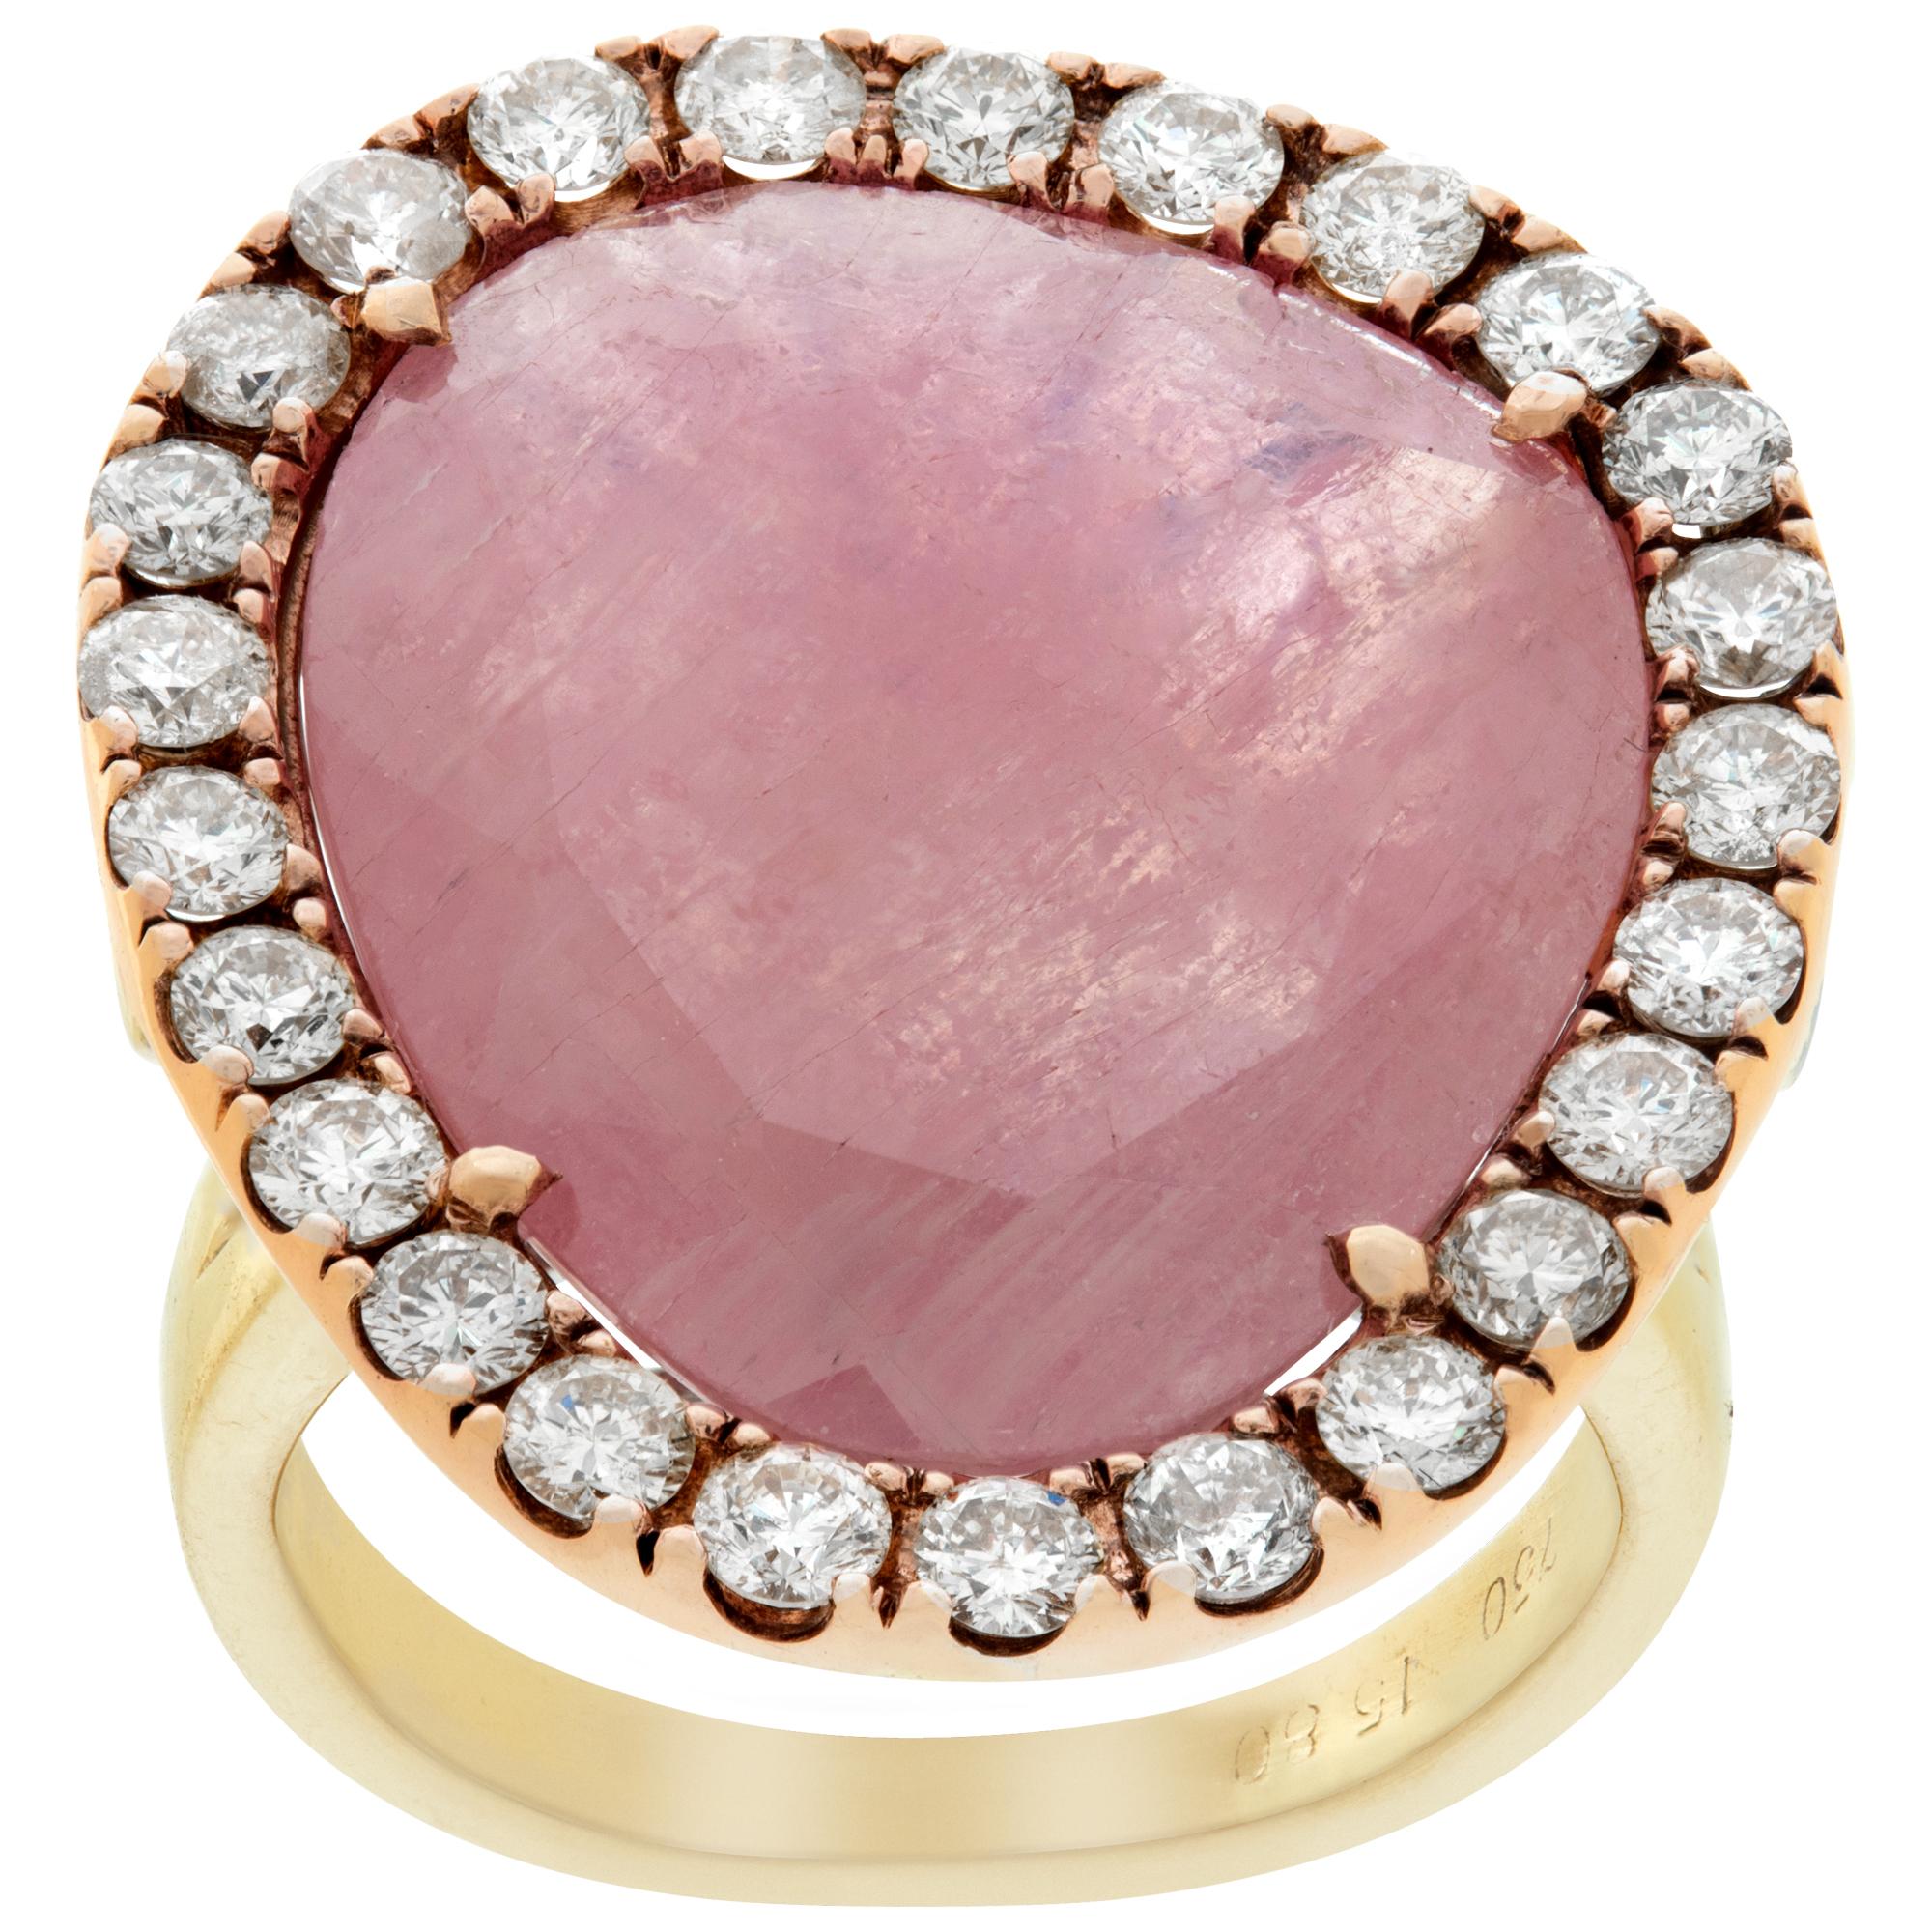 Rose quartz faceted ring w/ 1.00ct in surrounding diamonds in white & rose gold For Sale